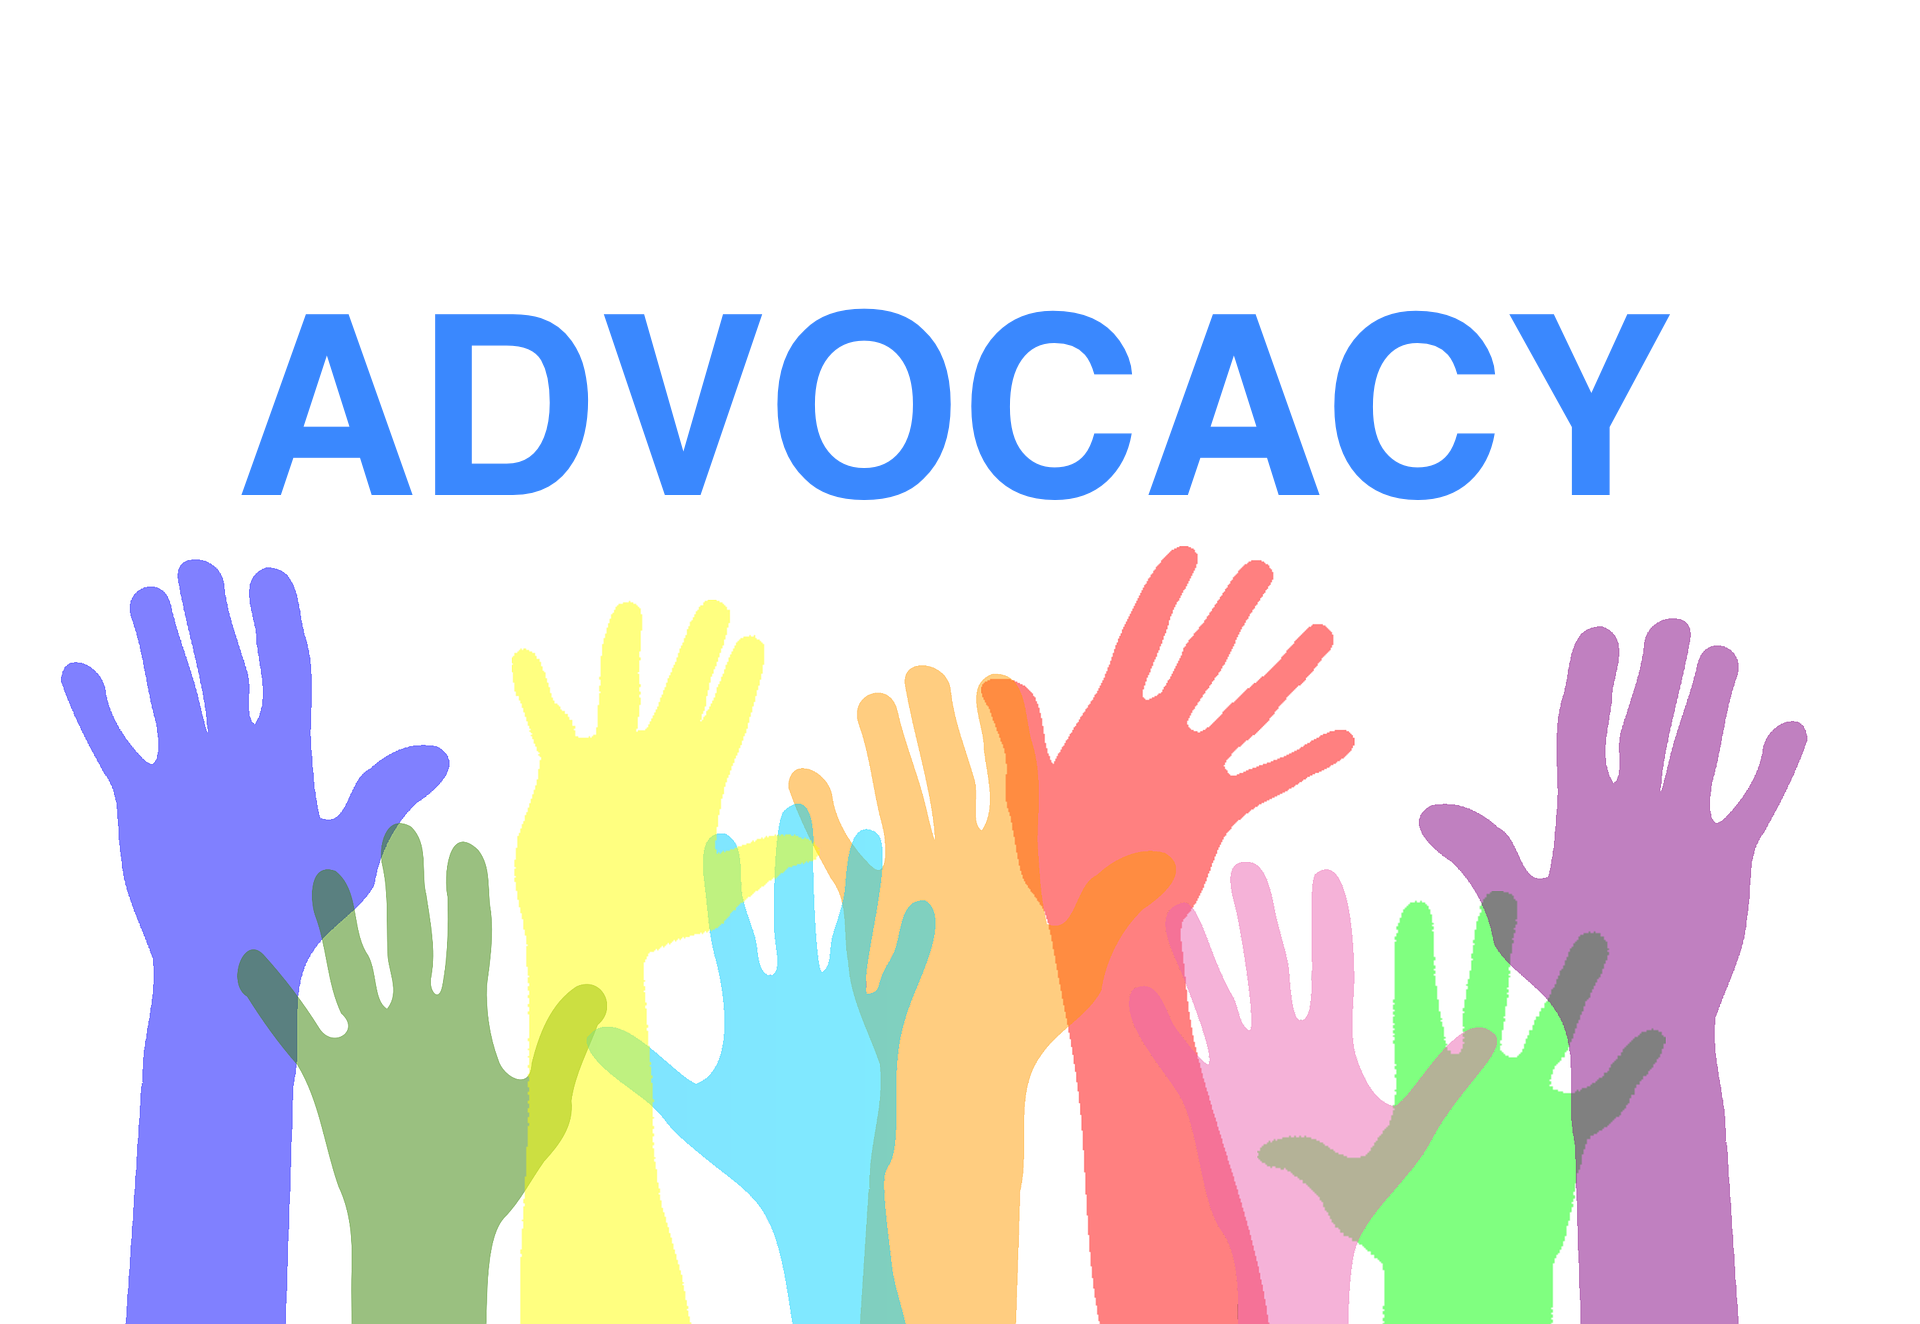 Image of colored hands along with the word 'Advocacy'